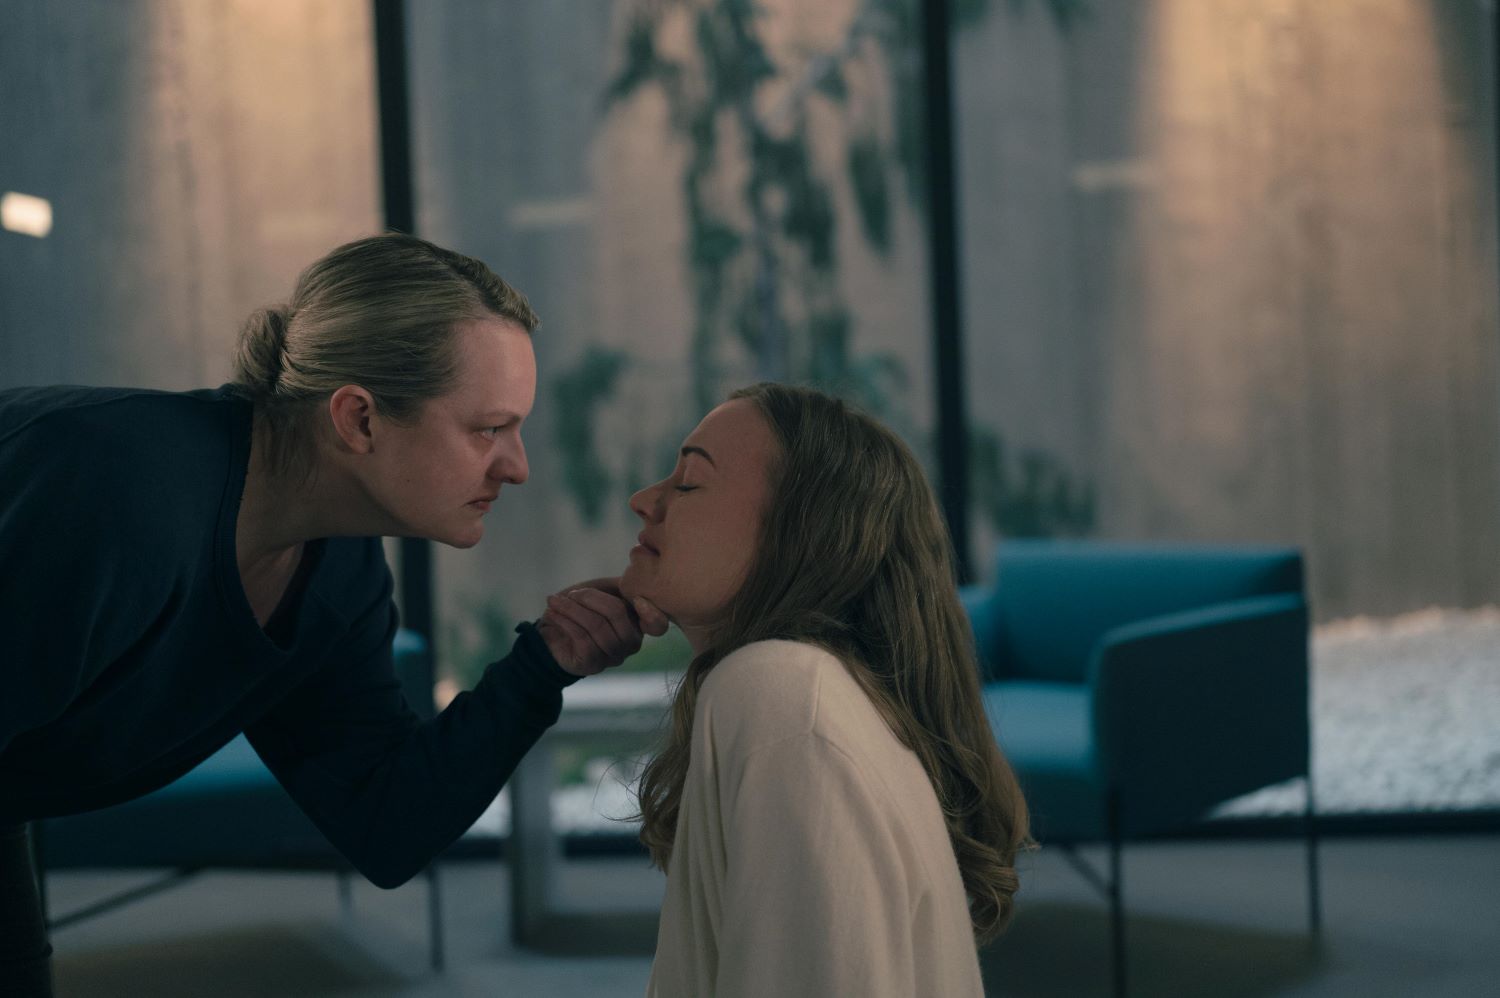 Elisabeth Moss as June confronts Yvonne Strahovski as Serena, holding her chin and staring her in the face, in a scene from 'The Handmaid's Tale'